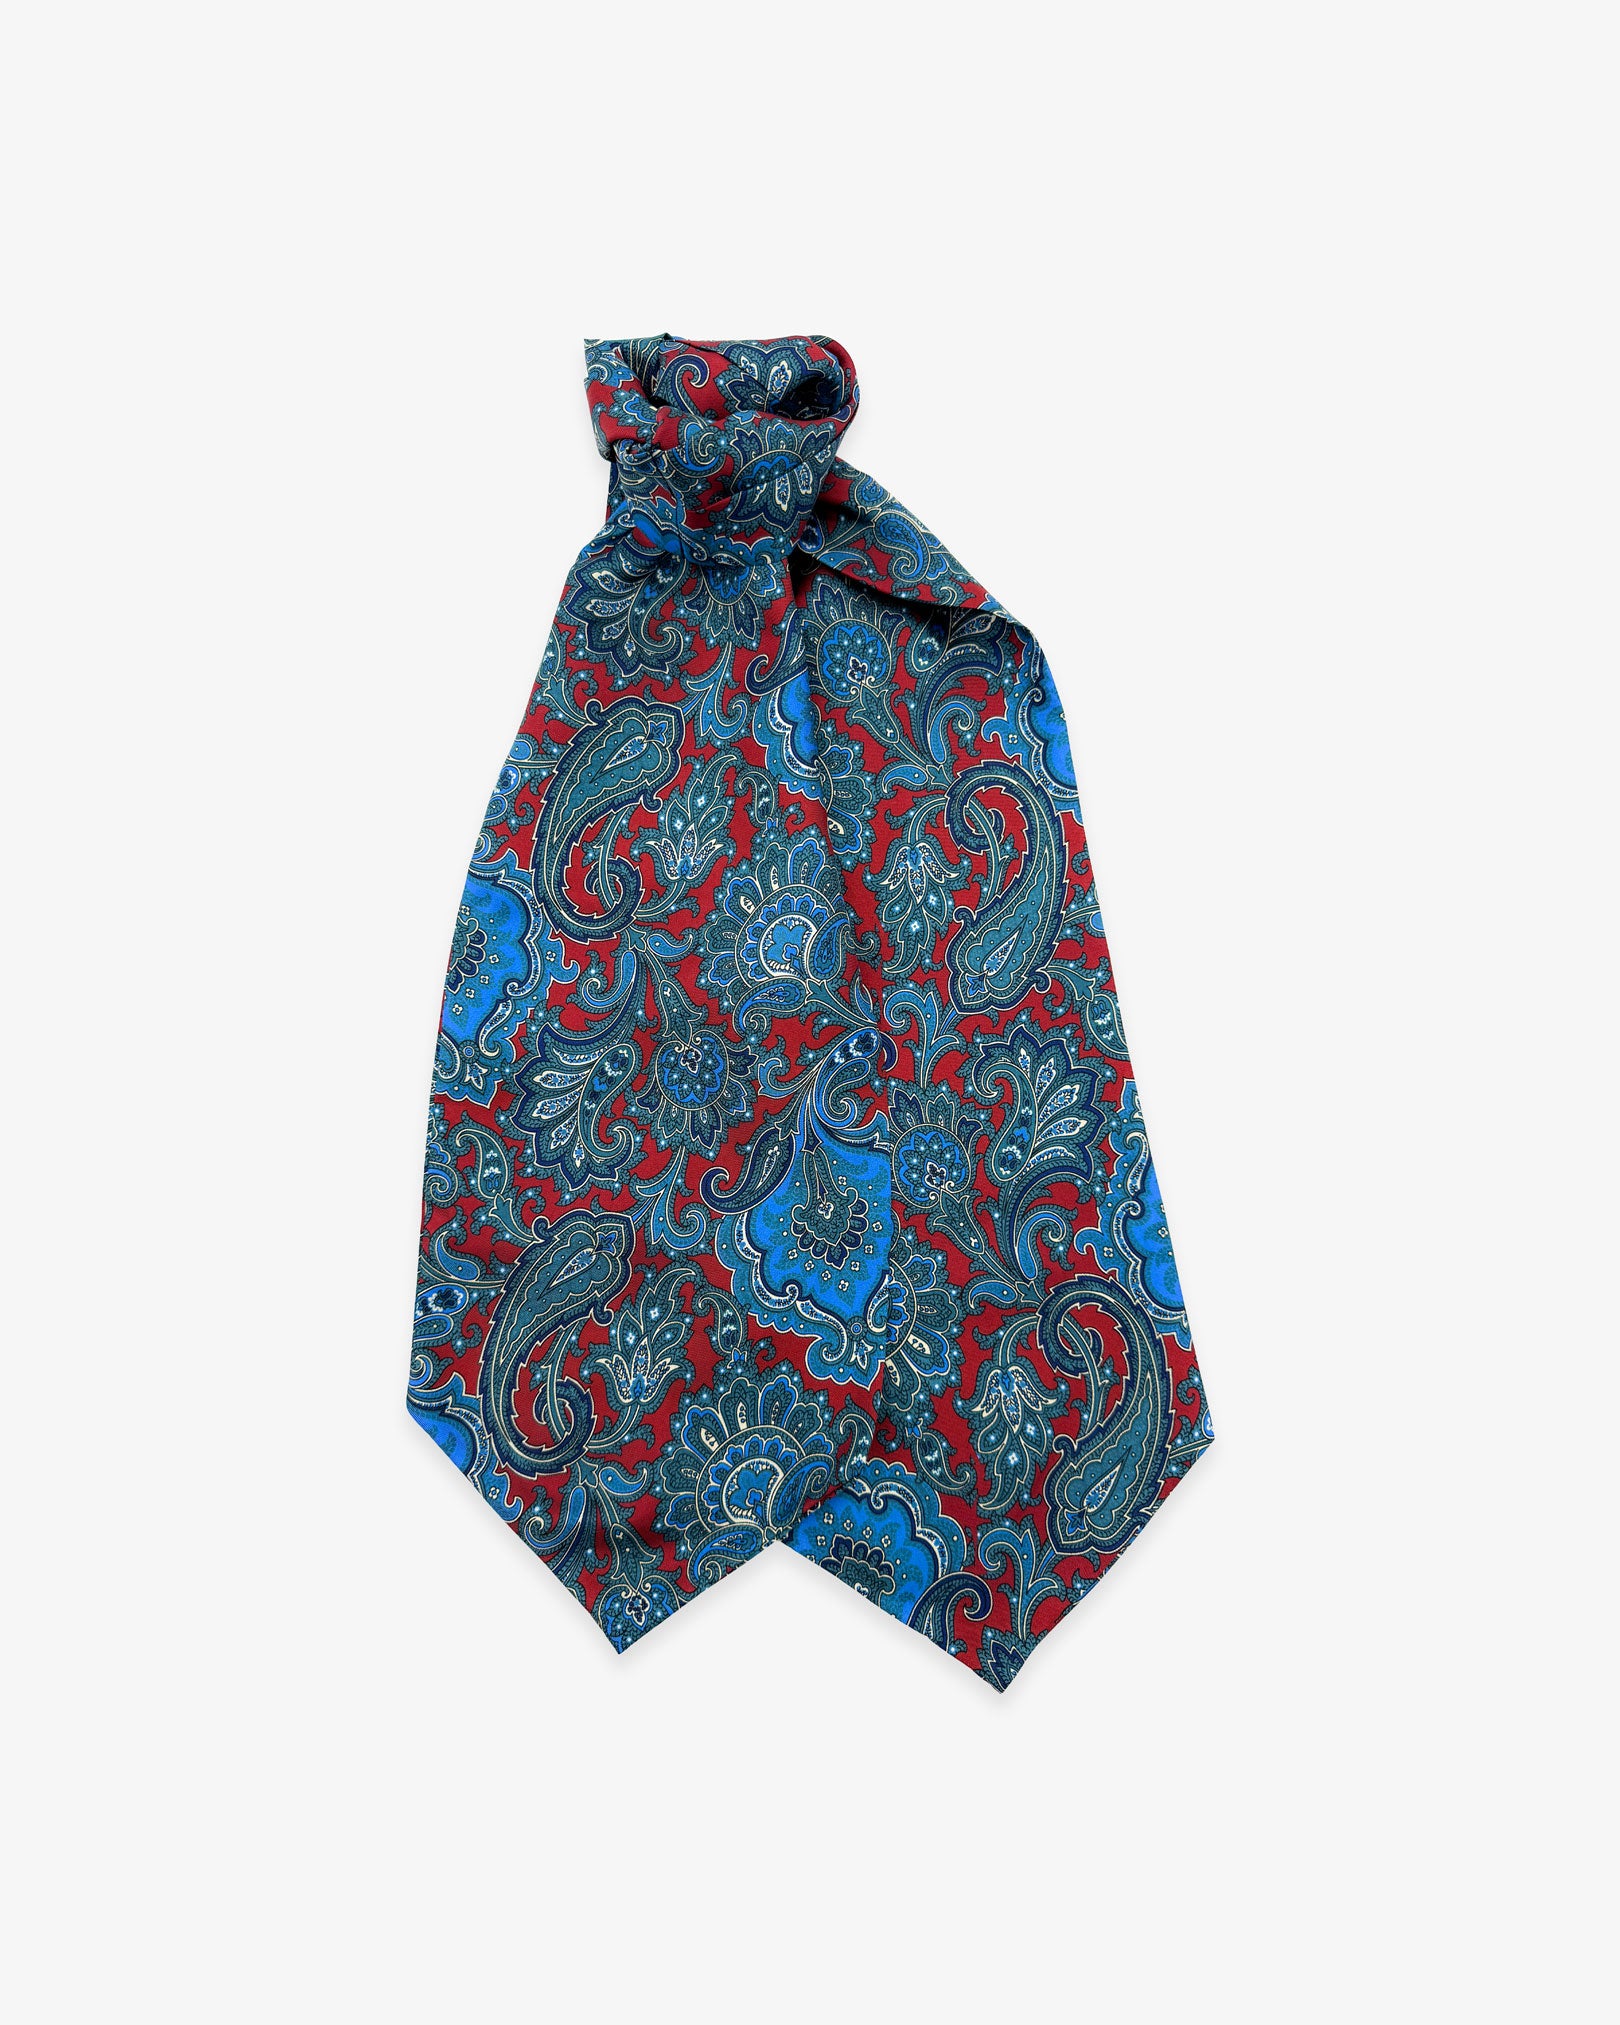 The Dean double Ascot tie with wide ends at the bottom and clear view of the blue paisley patterns against a deep red ground.